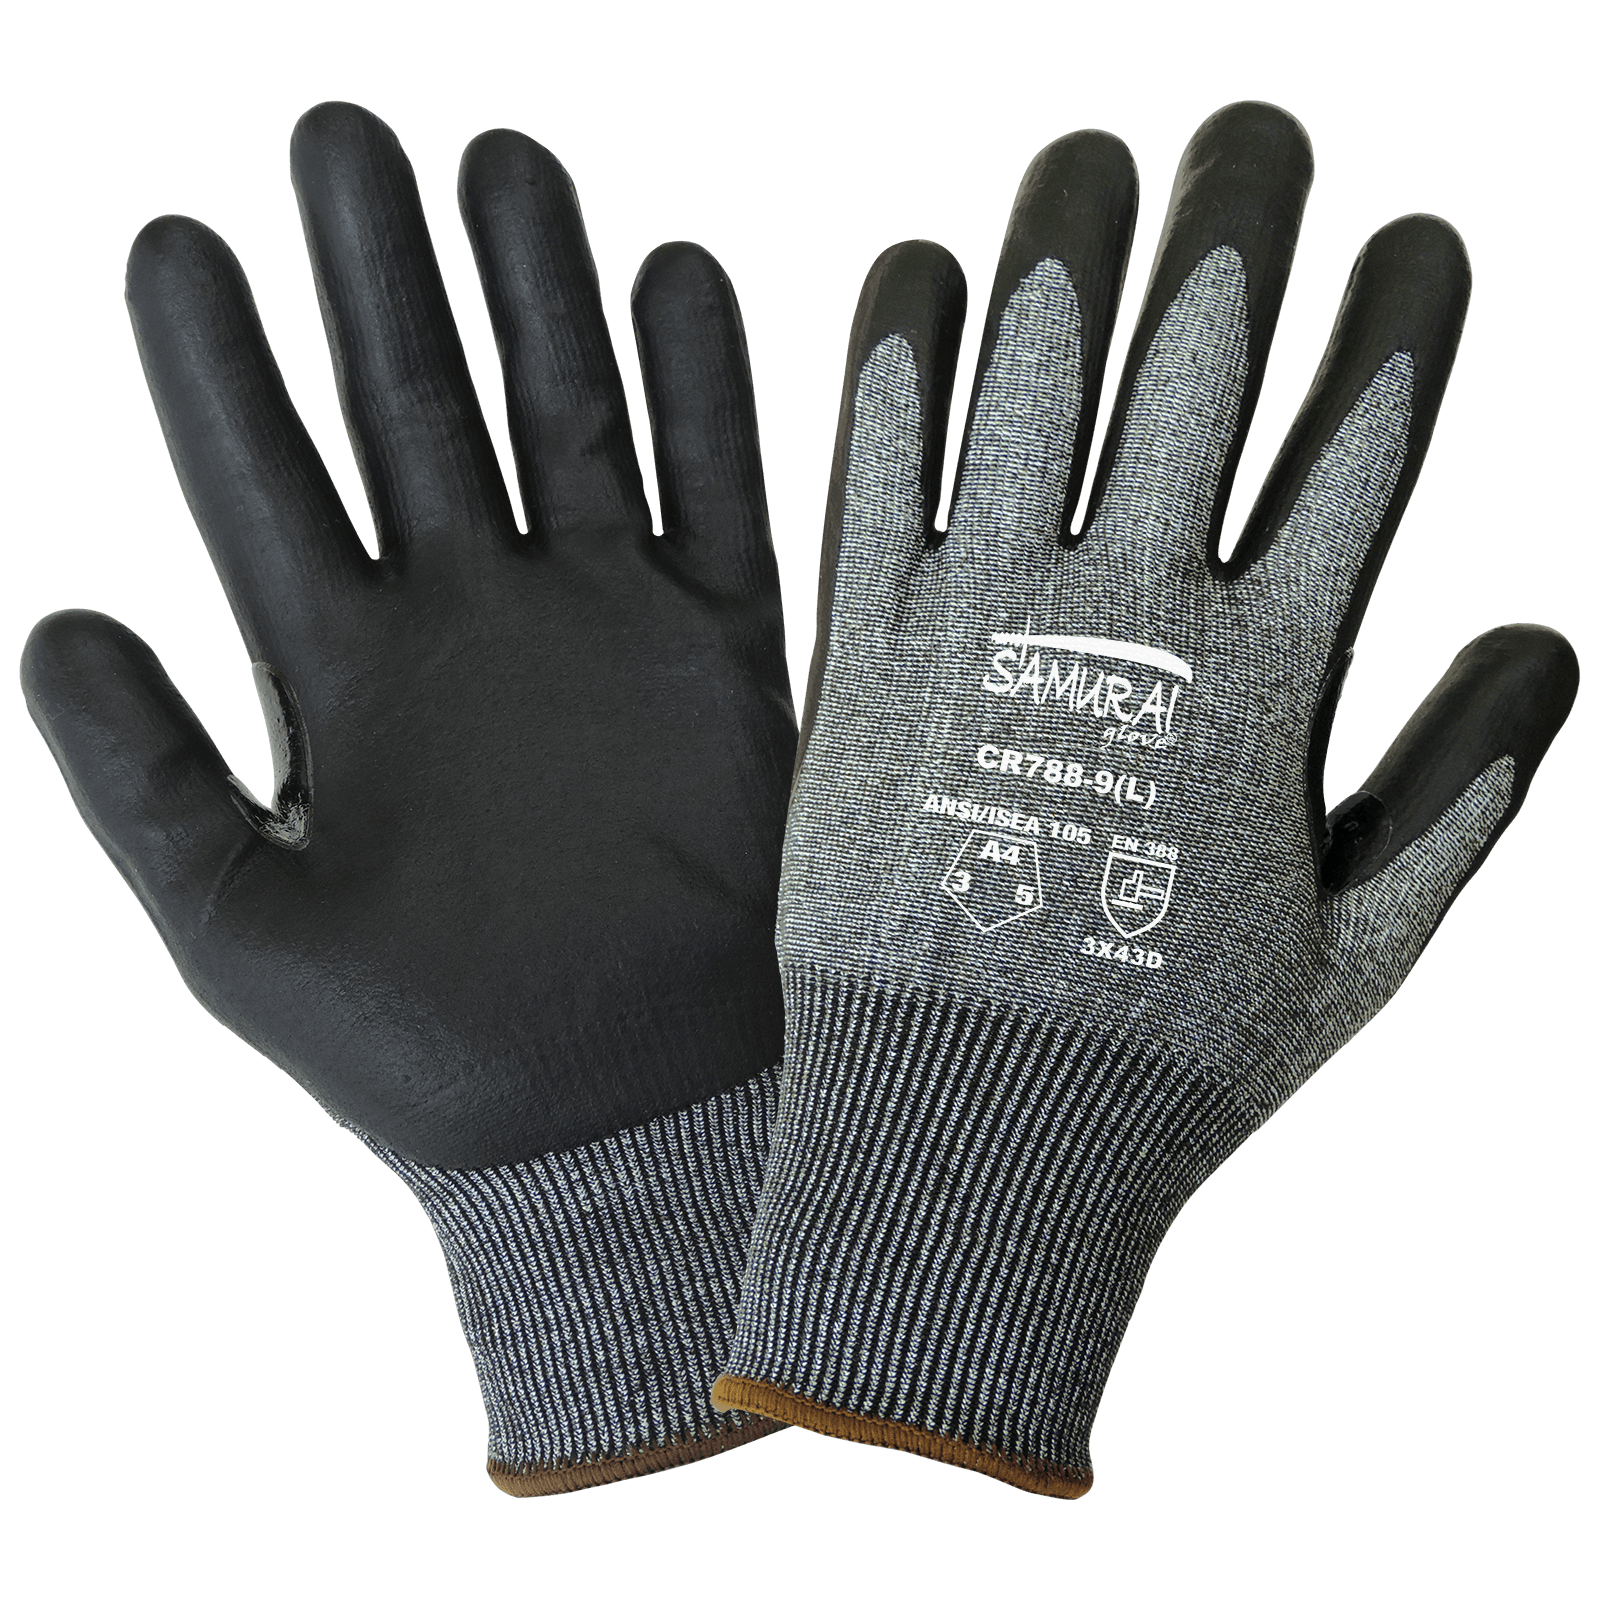 Samurai Glove® Touch Screen Compatible Cut, Abrasion, and Puncture Resistant Glove - Gloves